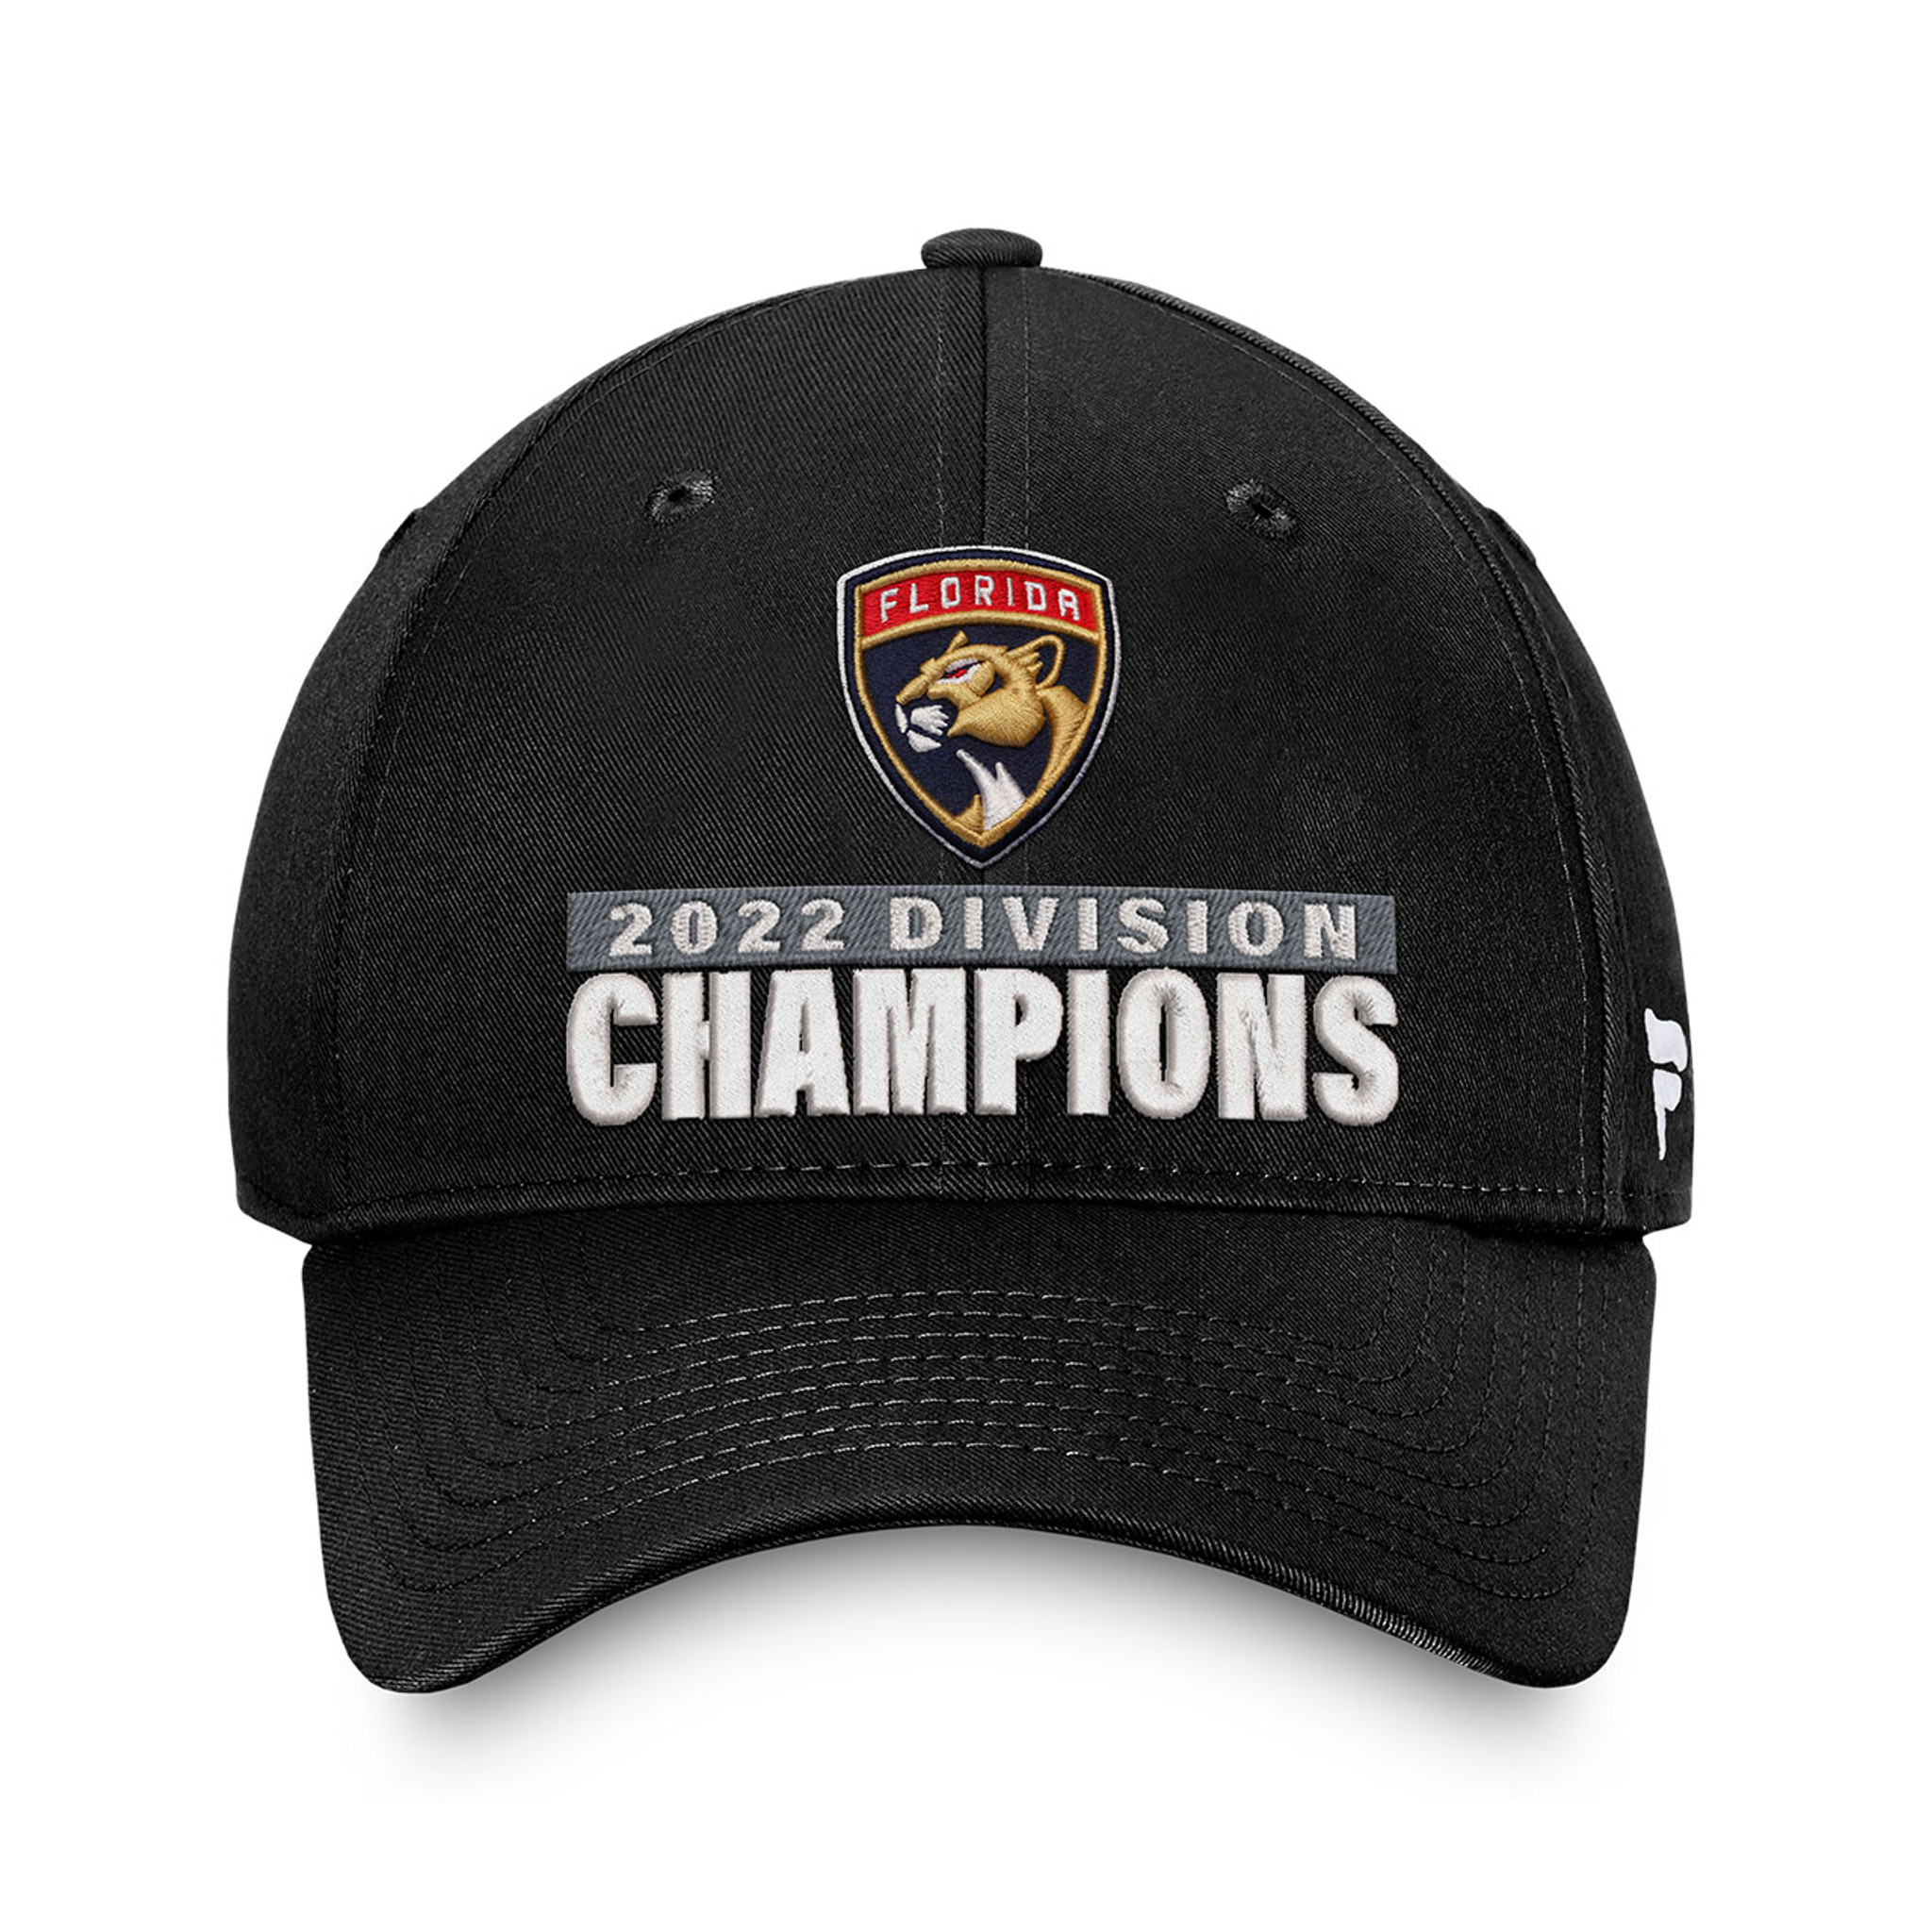 Florida Panthers 2023 Stanley Cup Final Locker Room Hat - Red